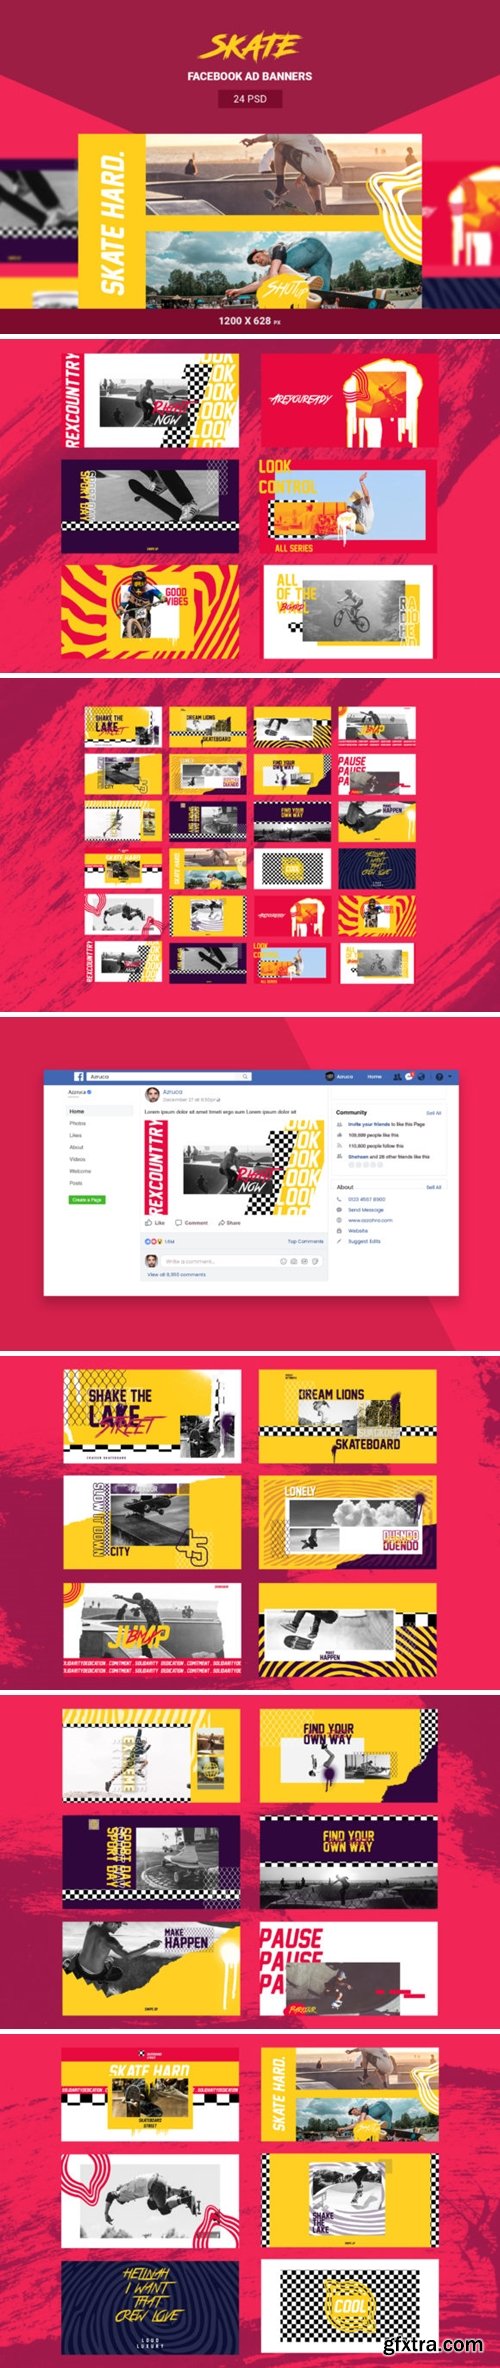 Skate Facebook Ad Banners 3382591